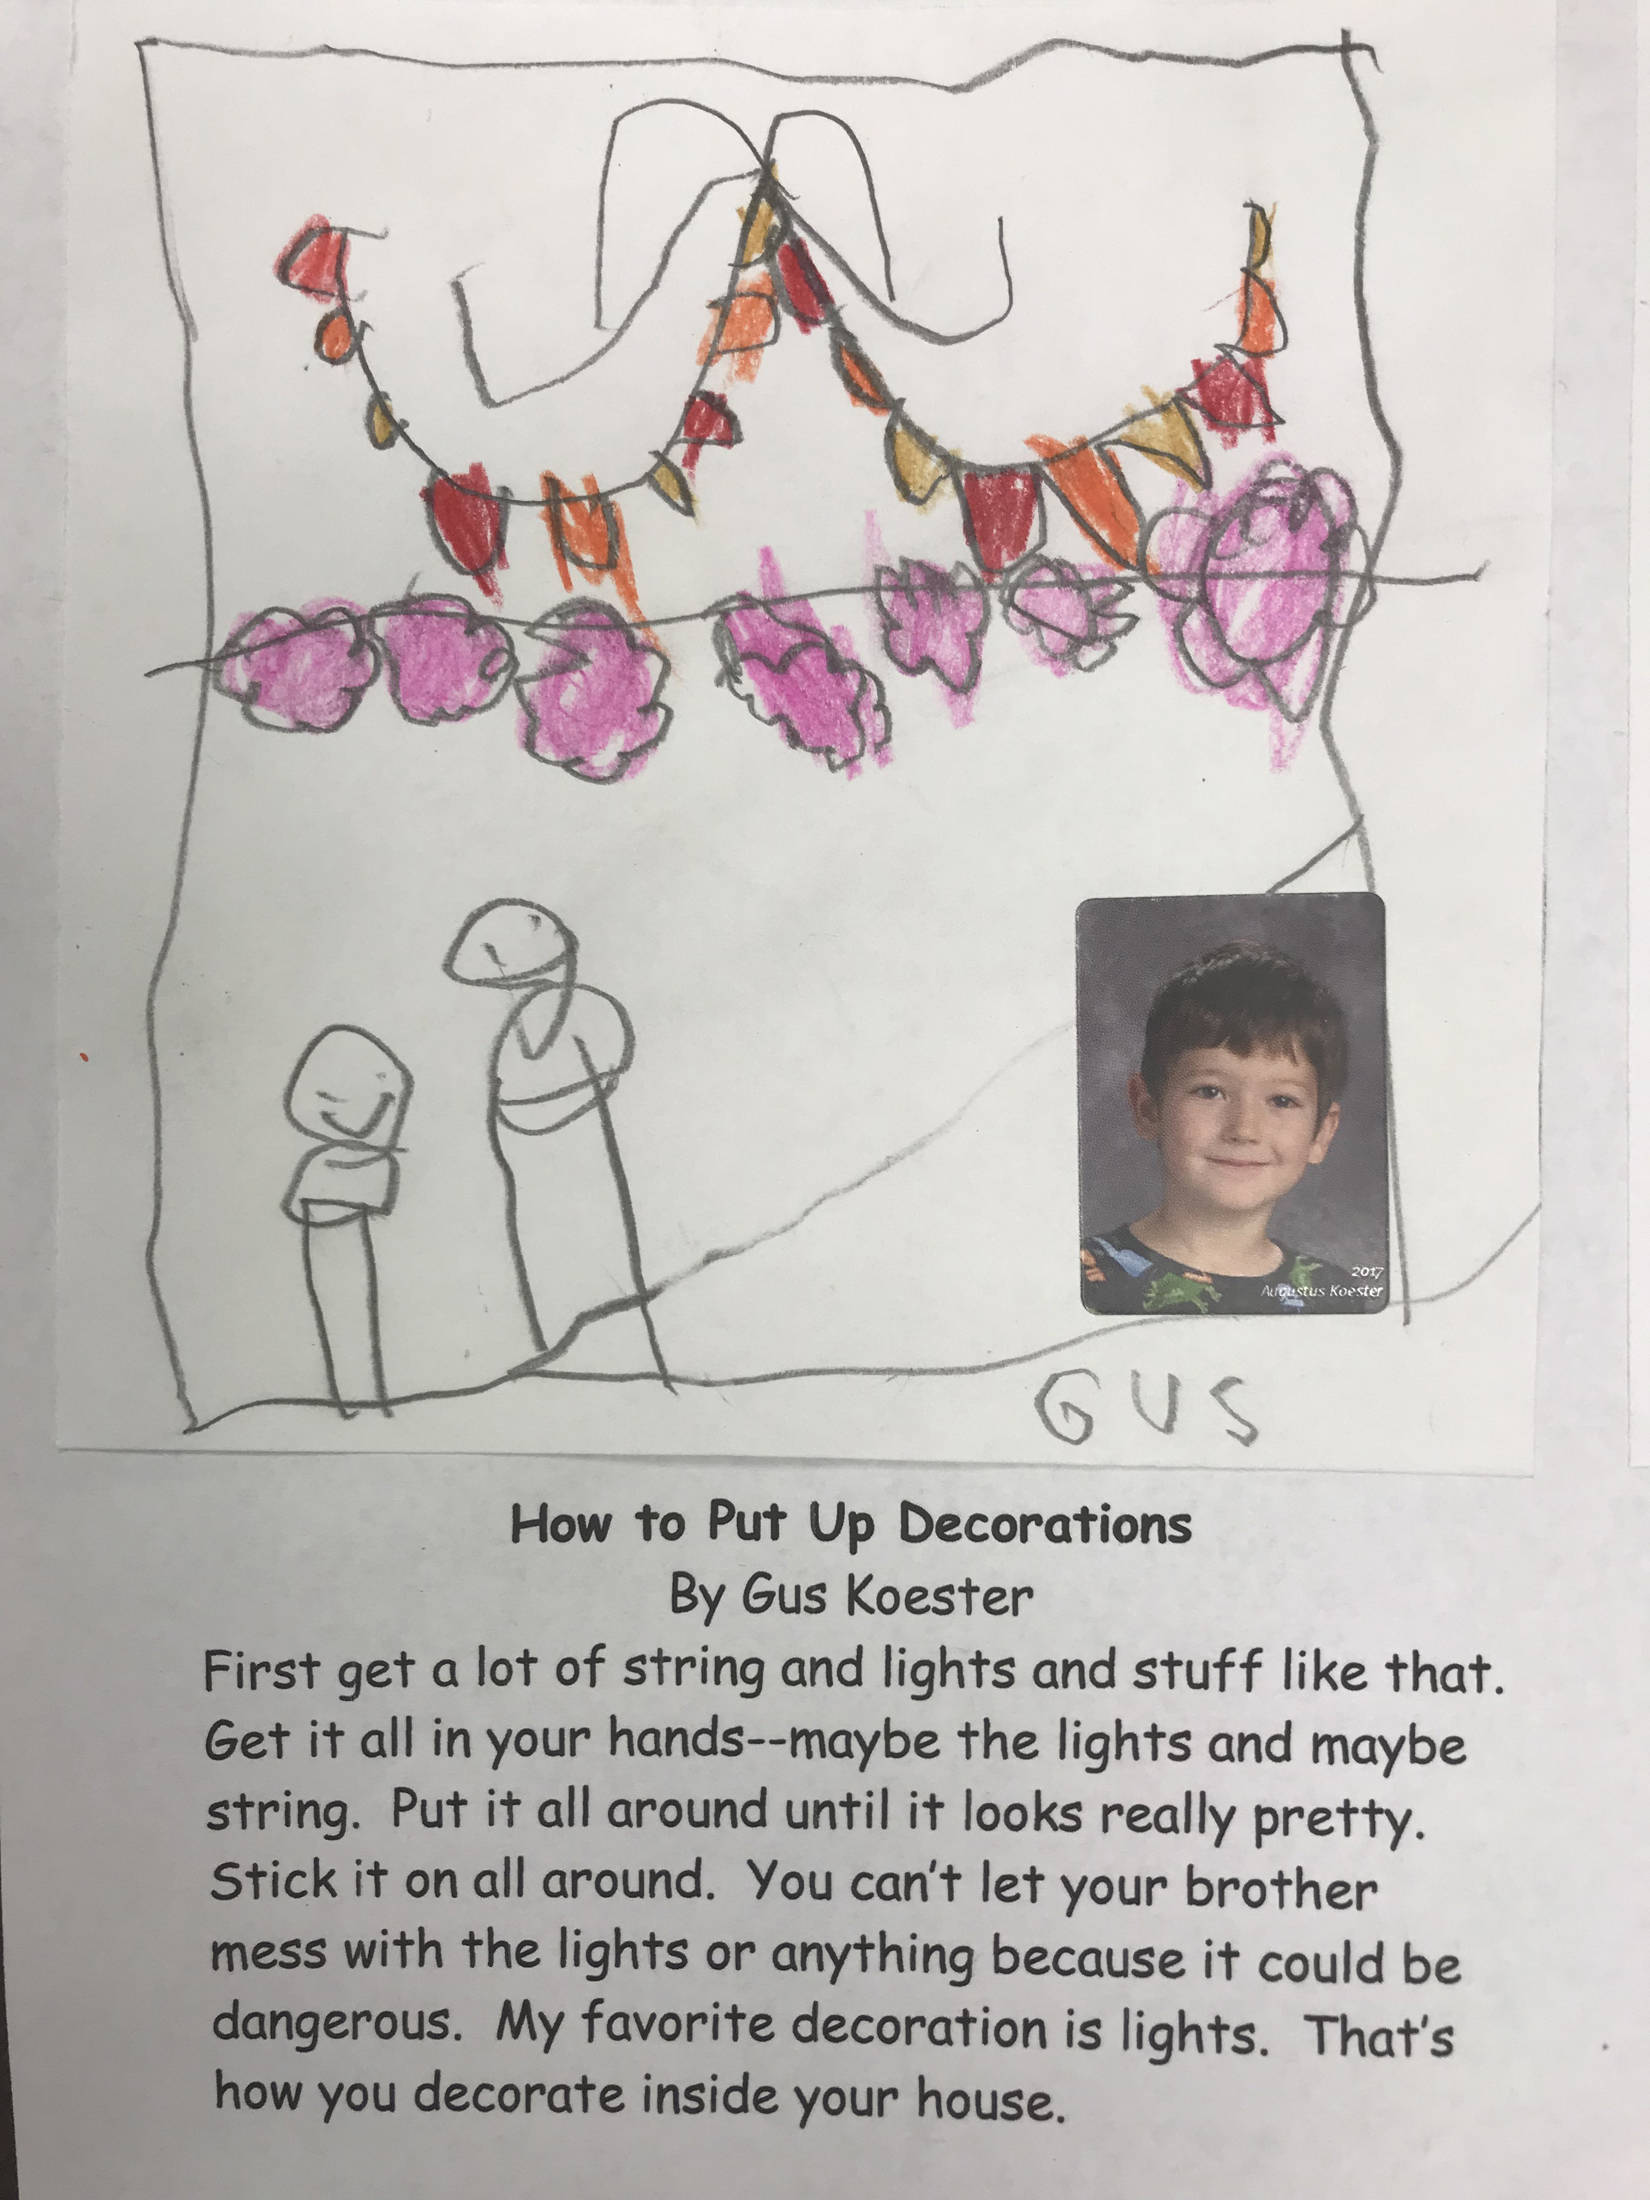 This holiday instruction made by Gus Koester is part of an 18-page “How to Get Ready for the Holidays” book created by the students of Jennifer Reinhart’s kindergarten class. (Photo courtesy Jennifer Reinhart)